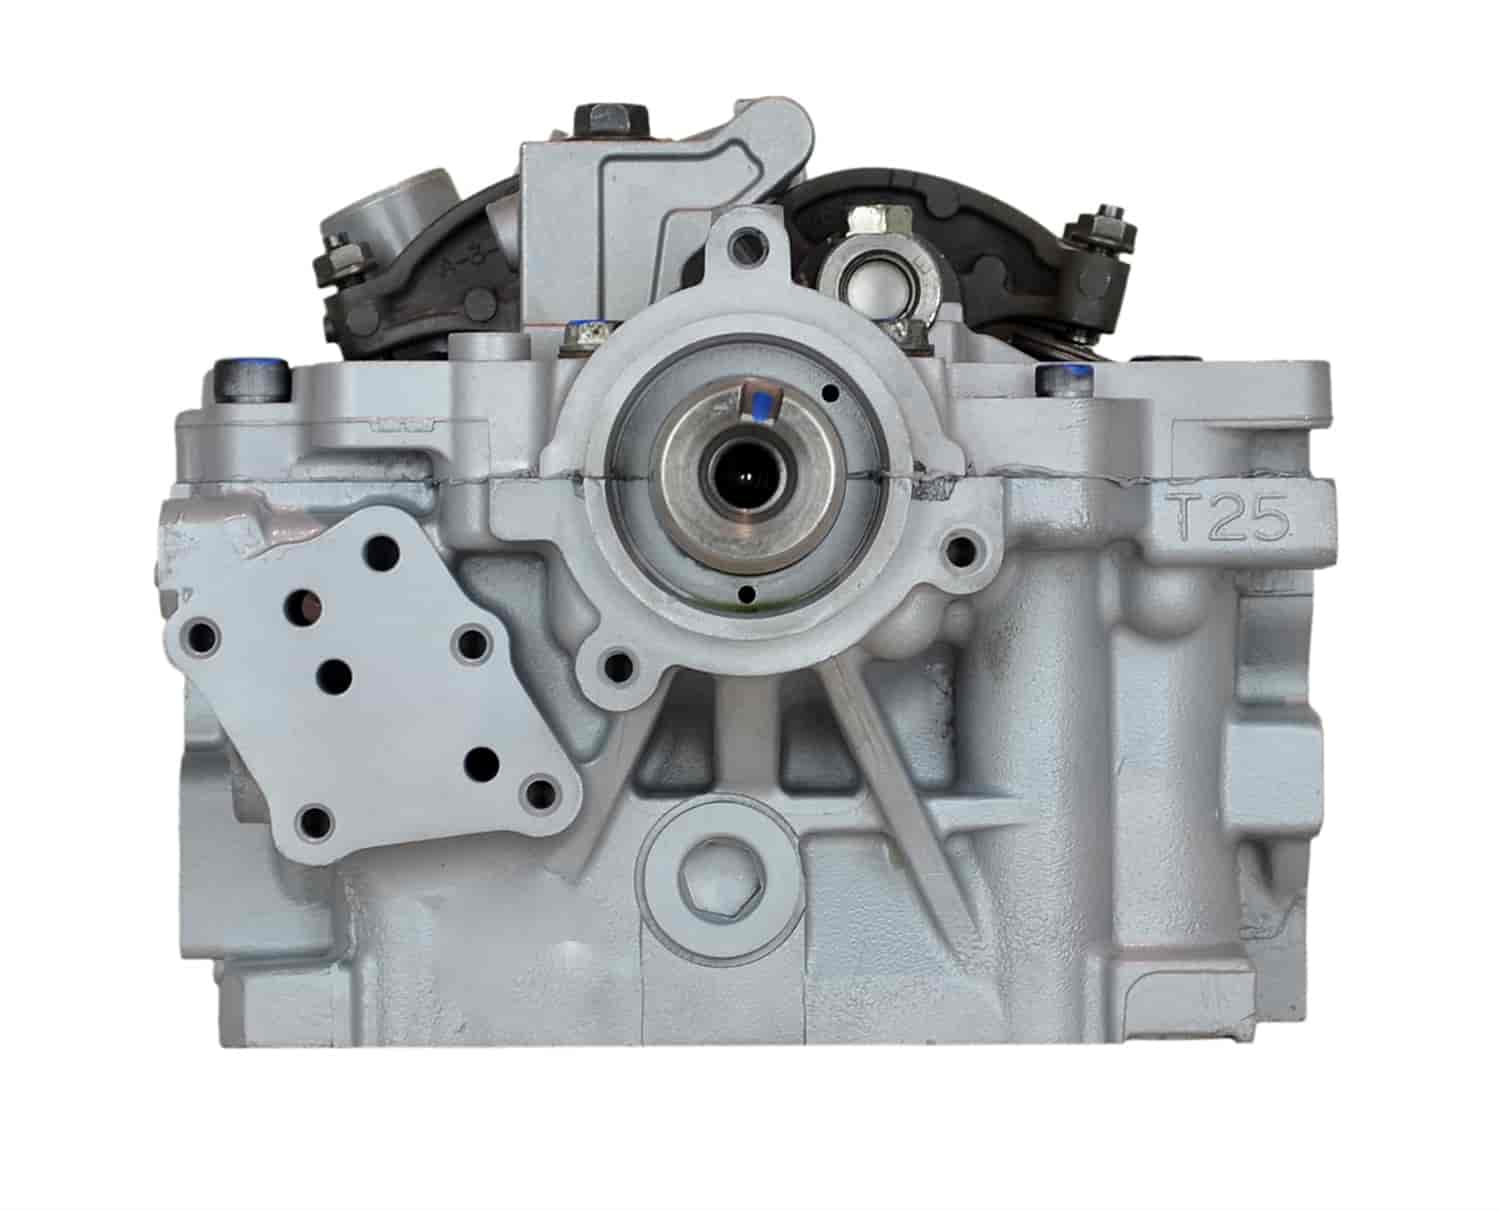 Remanufactured Cylinder Head for 2005-2011 Subaru/Saab with 2.5L H4